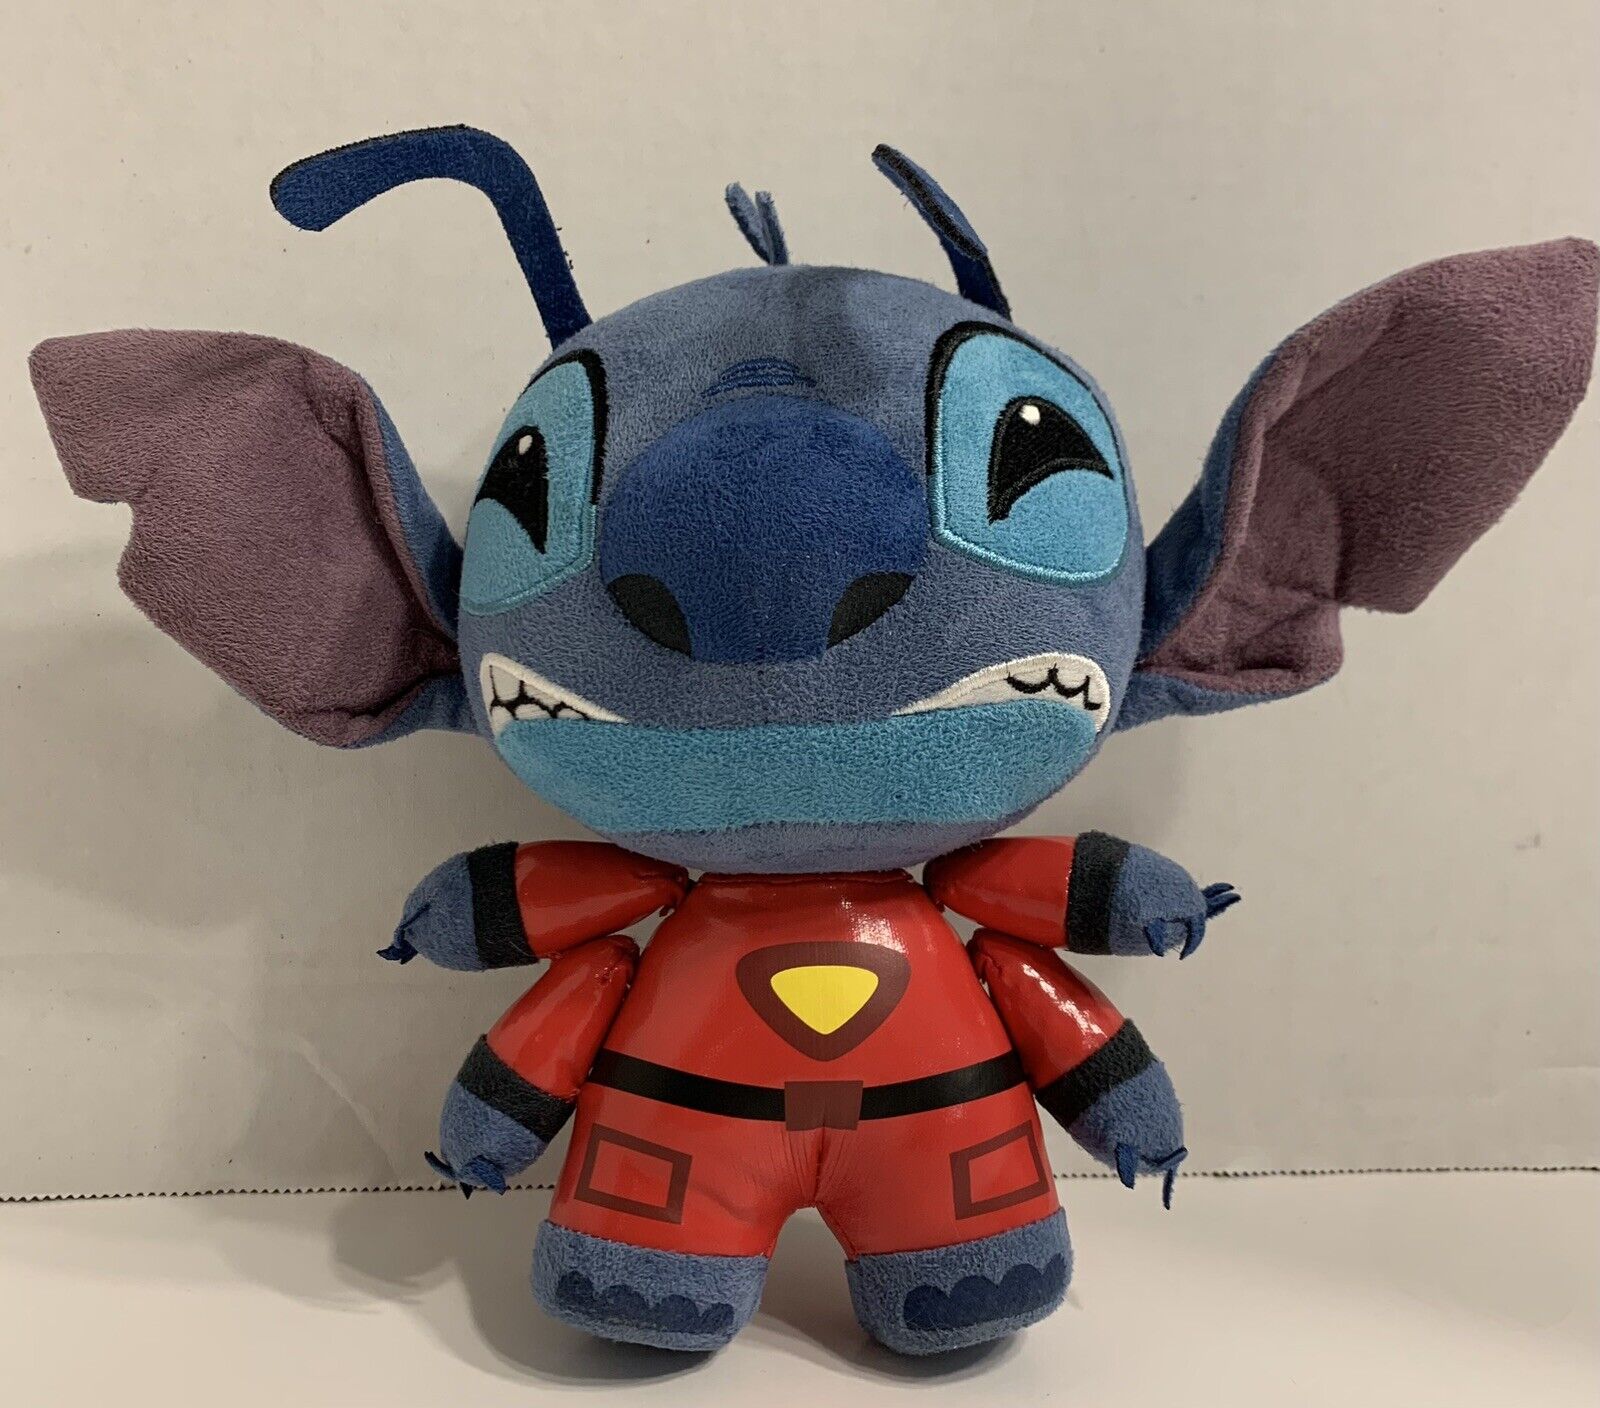 HTF Small Disney Lilo & Stitch 8.5” Plush in Red Spacesuit Suede Like, Four Arms